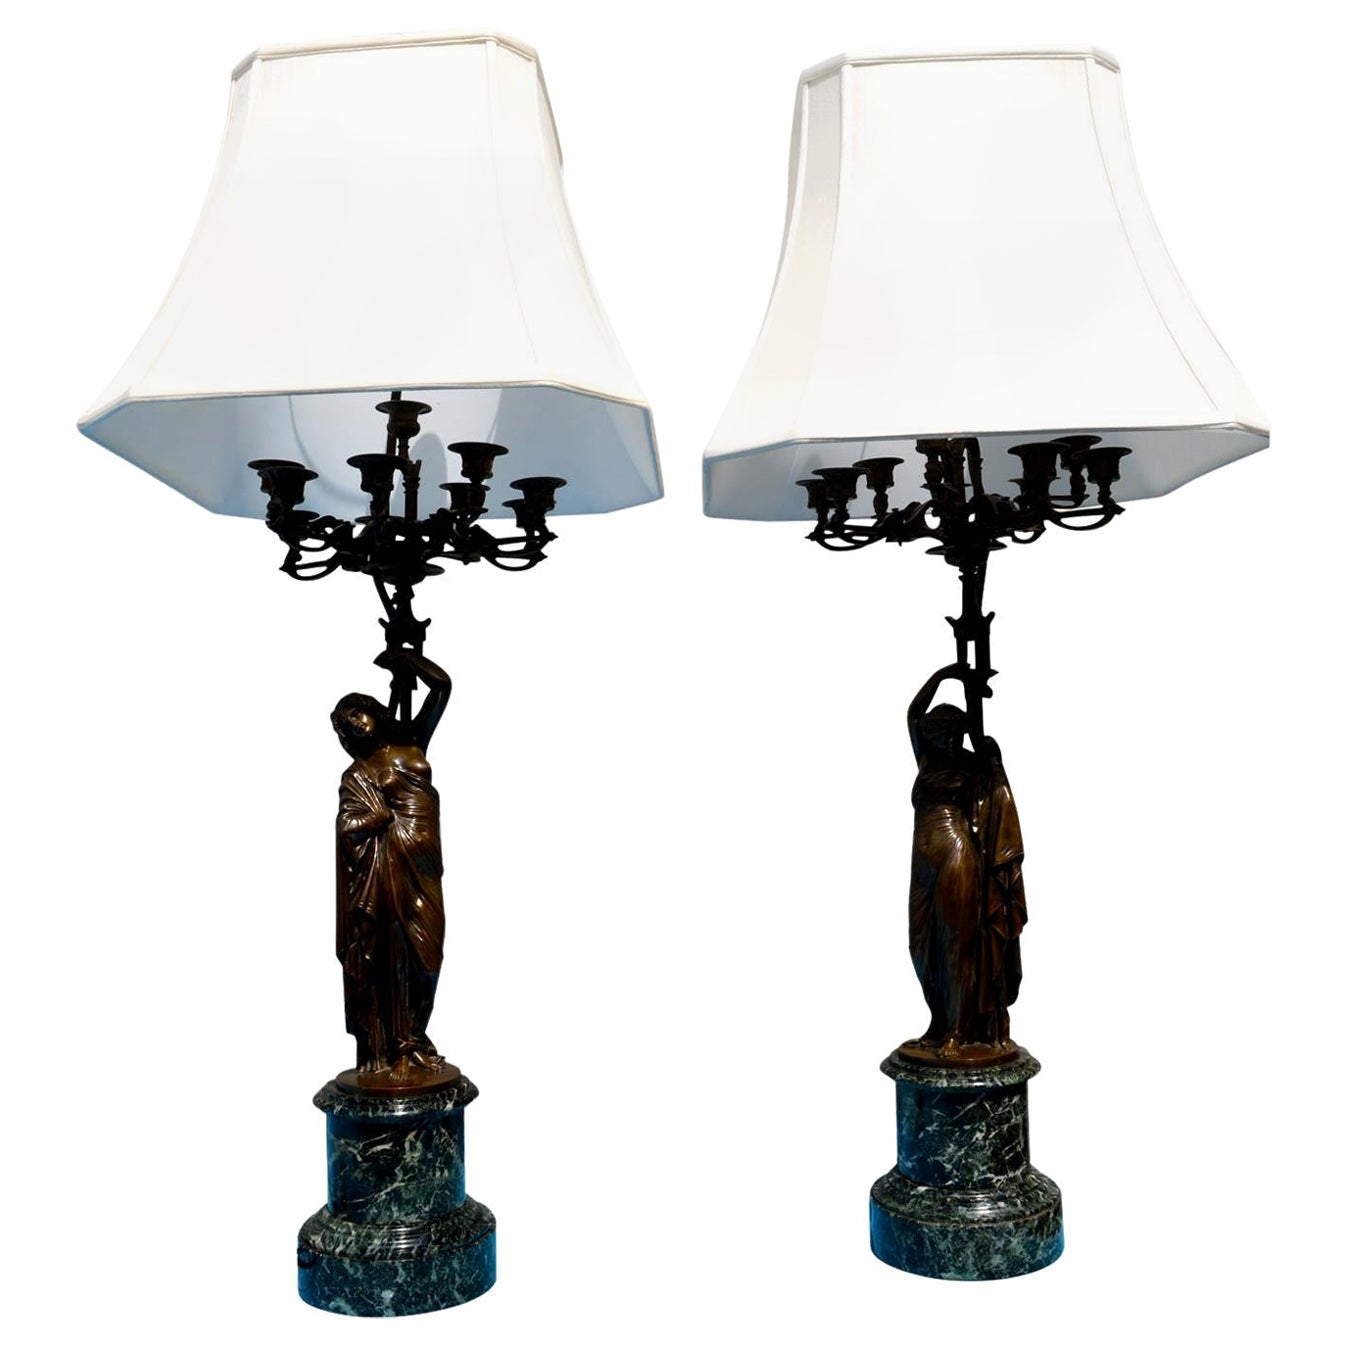 Pair of French 19th Century Figurative Patinated Bronze Candelabra Lamps For Sale